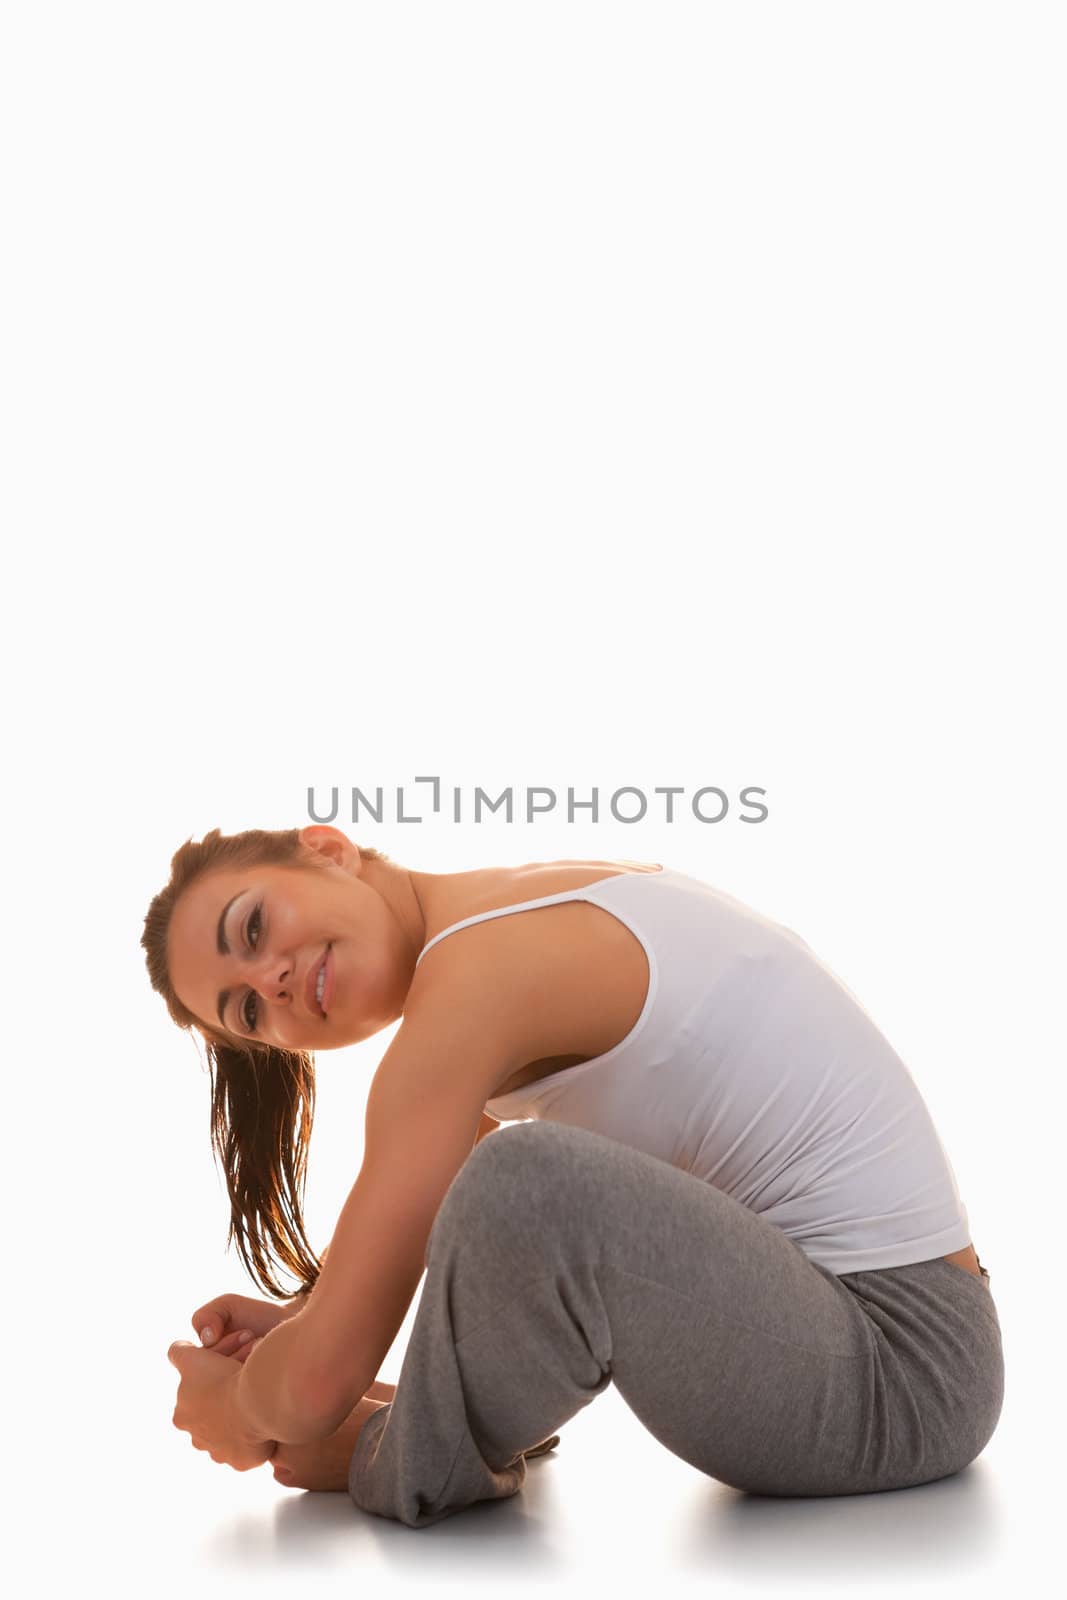 Portrait of a young woman stretching her legs against a white background